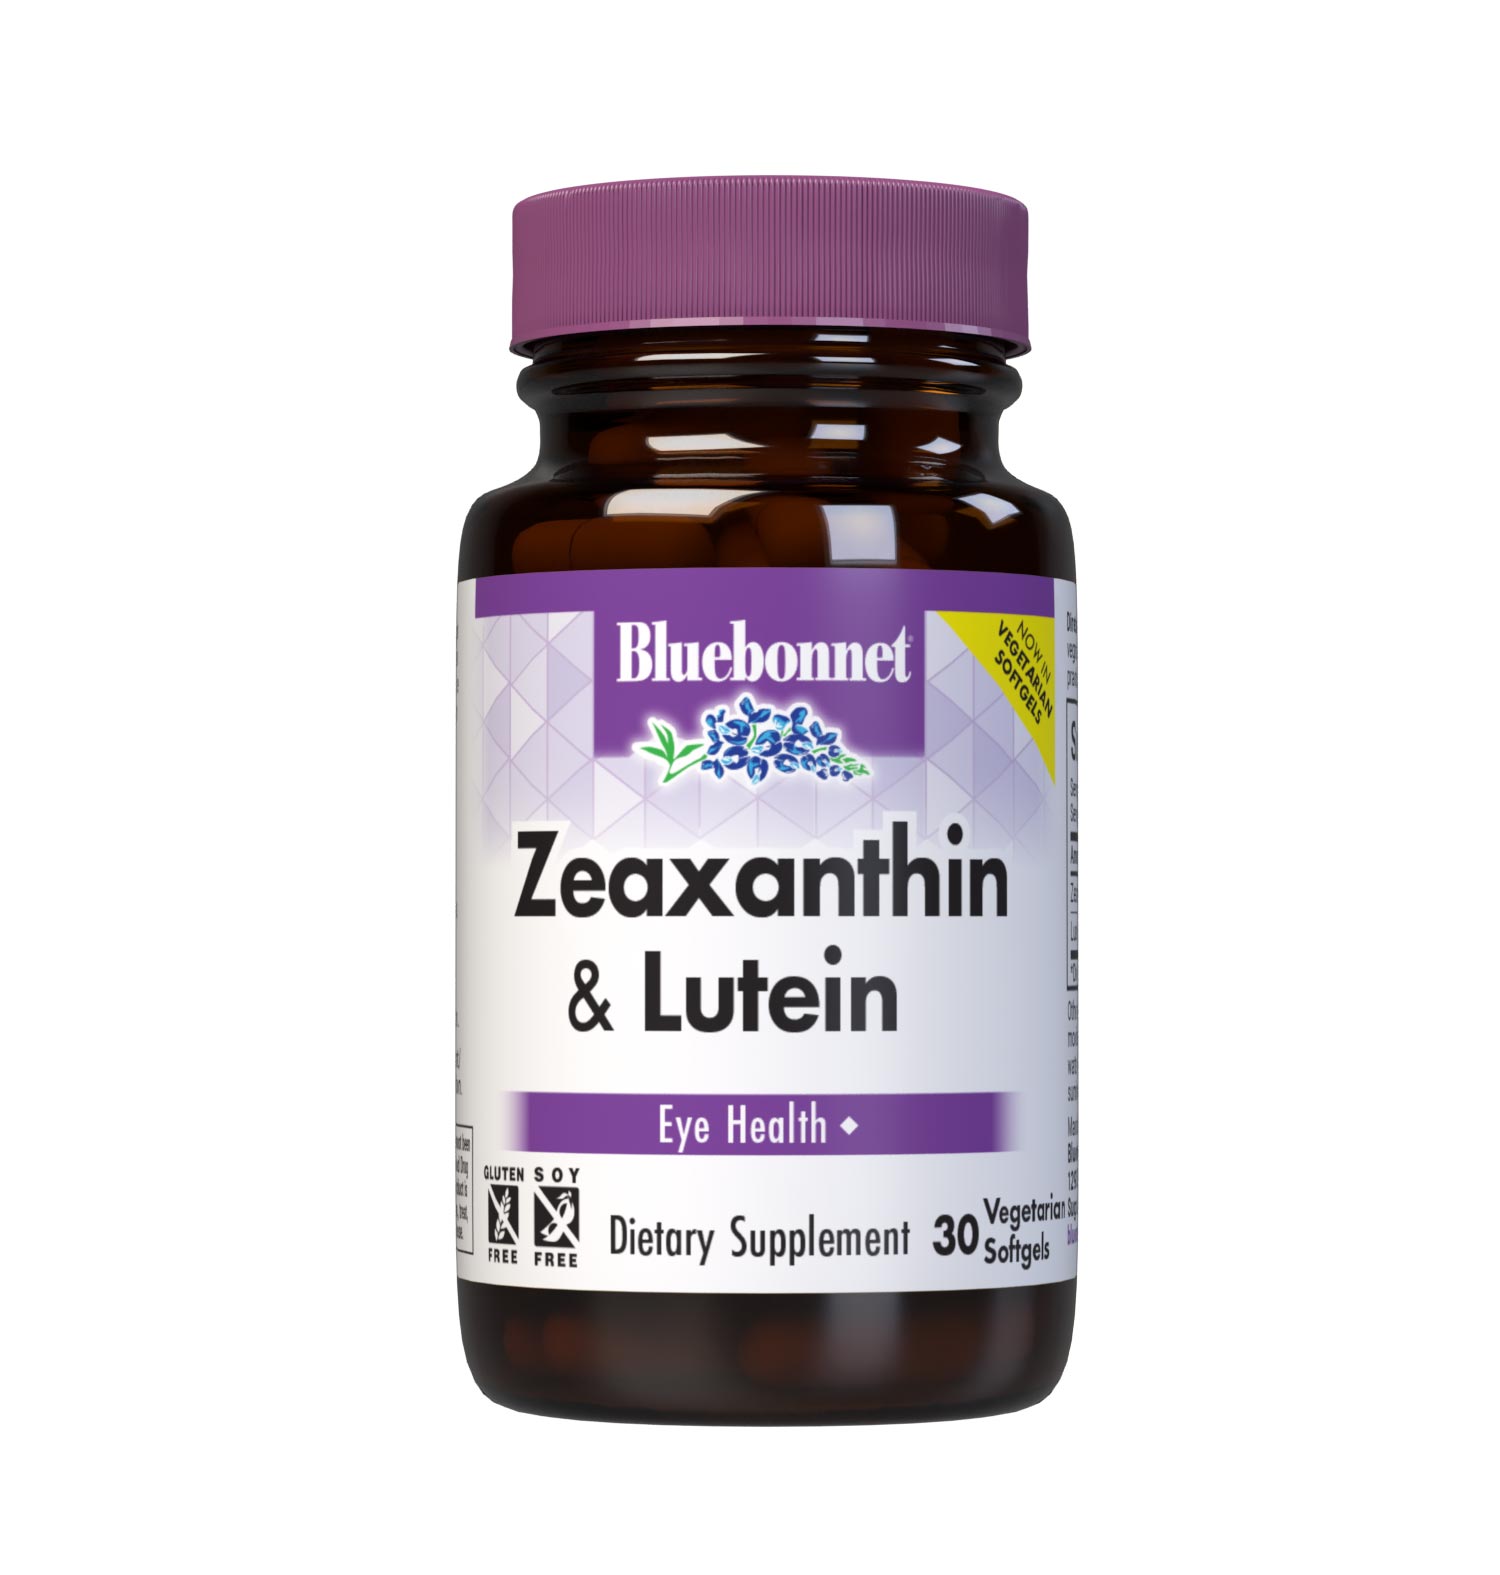 Bluebonnet’s Zeaxanthin & Lutein 30 Softgels are formulated with zeaxanthin and lutein from paprika and marigold flower extracts. Zeaxanthin and lutein are carotenoids that serve as potent nutrients to support optimal eye health. #size_30 count